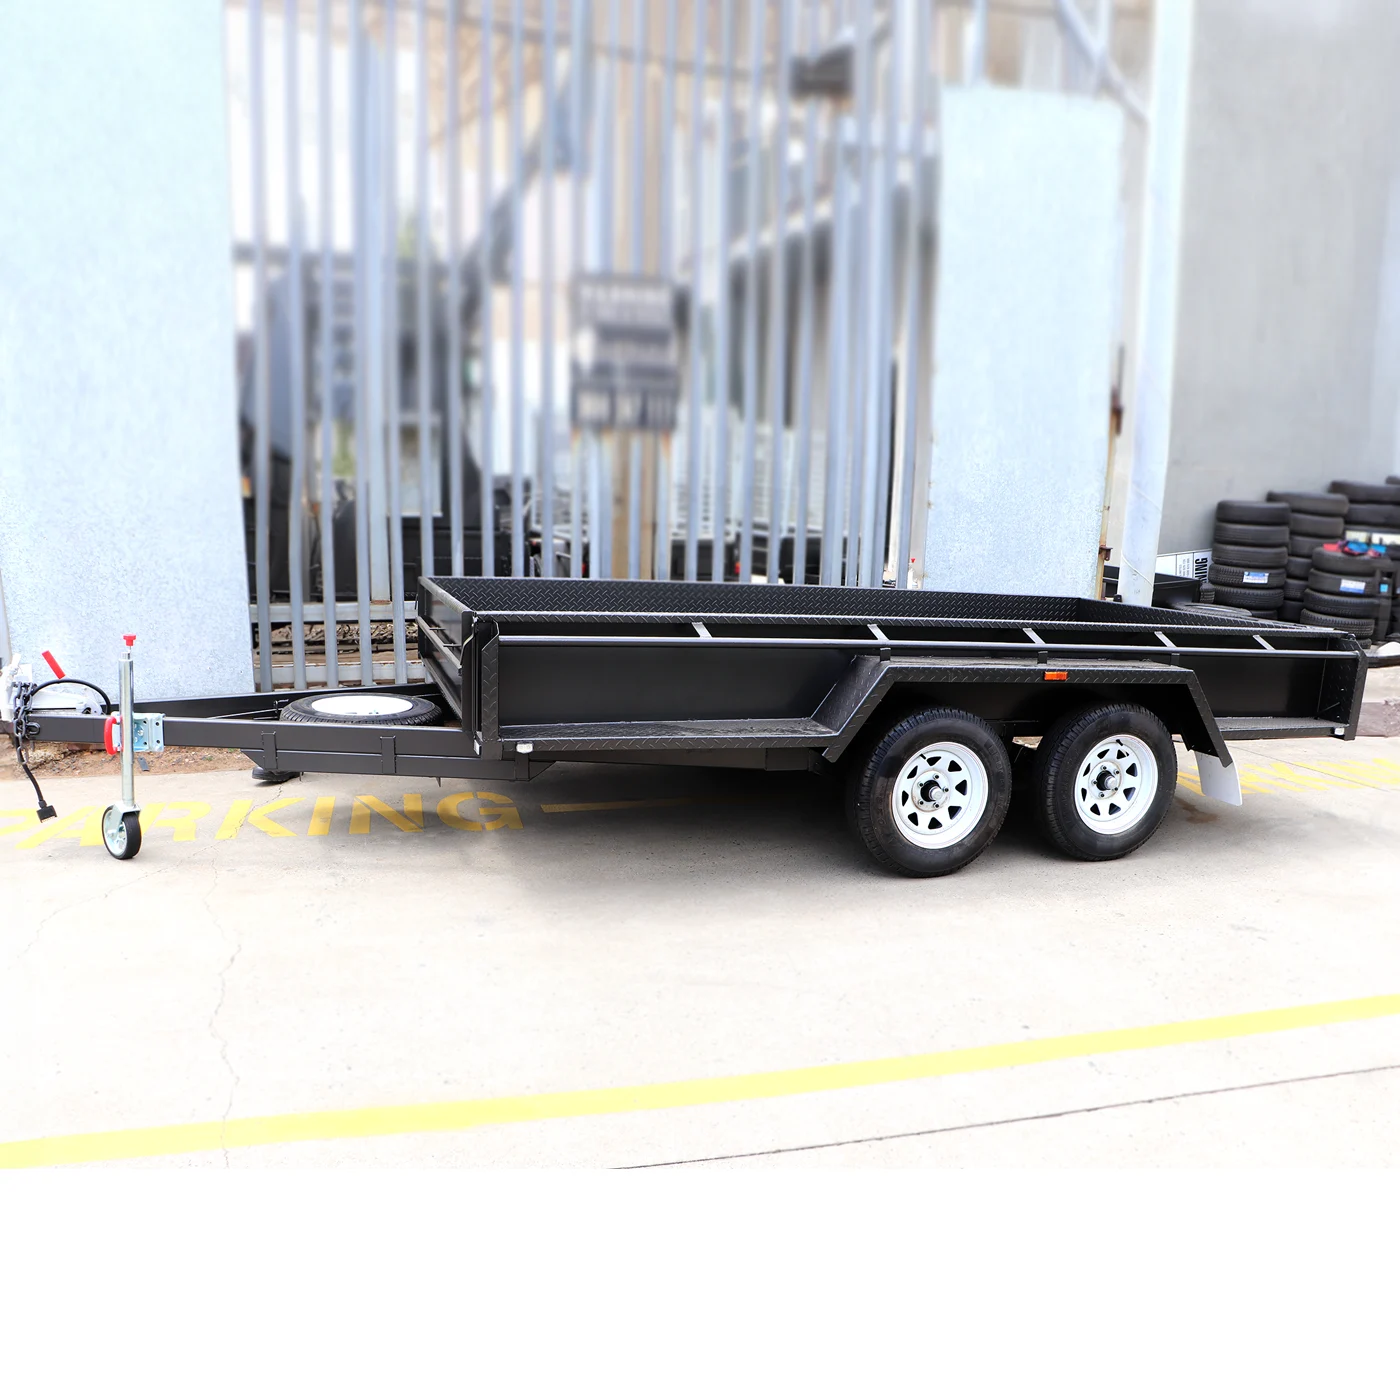 12x6 Heavy Duty Tandem Axle Box Trailer for Sale in Melbourne